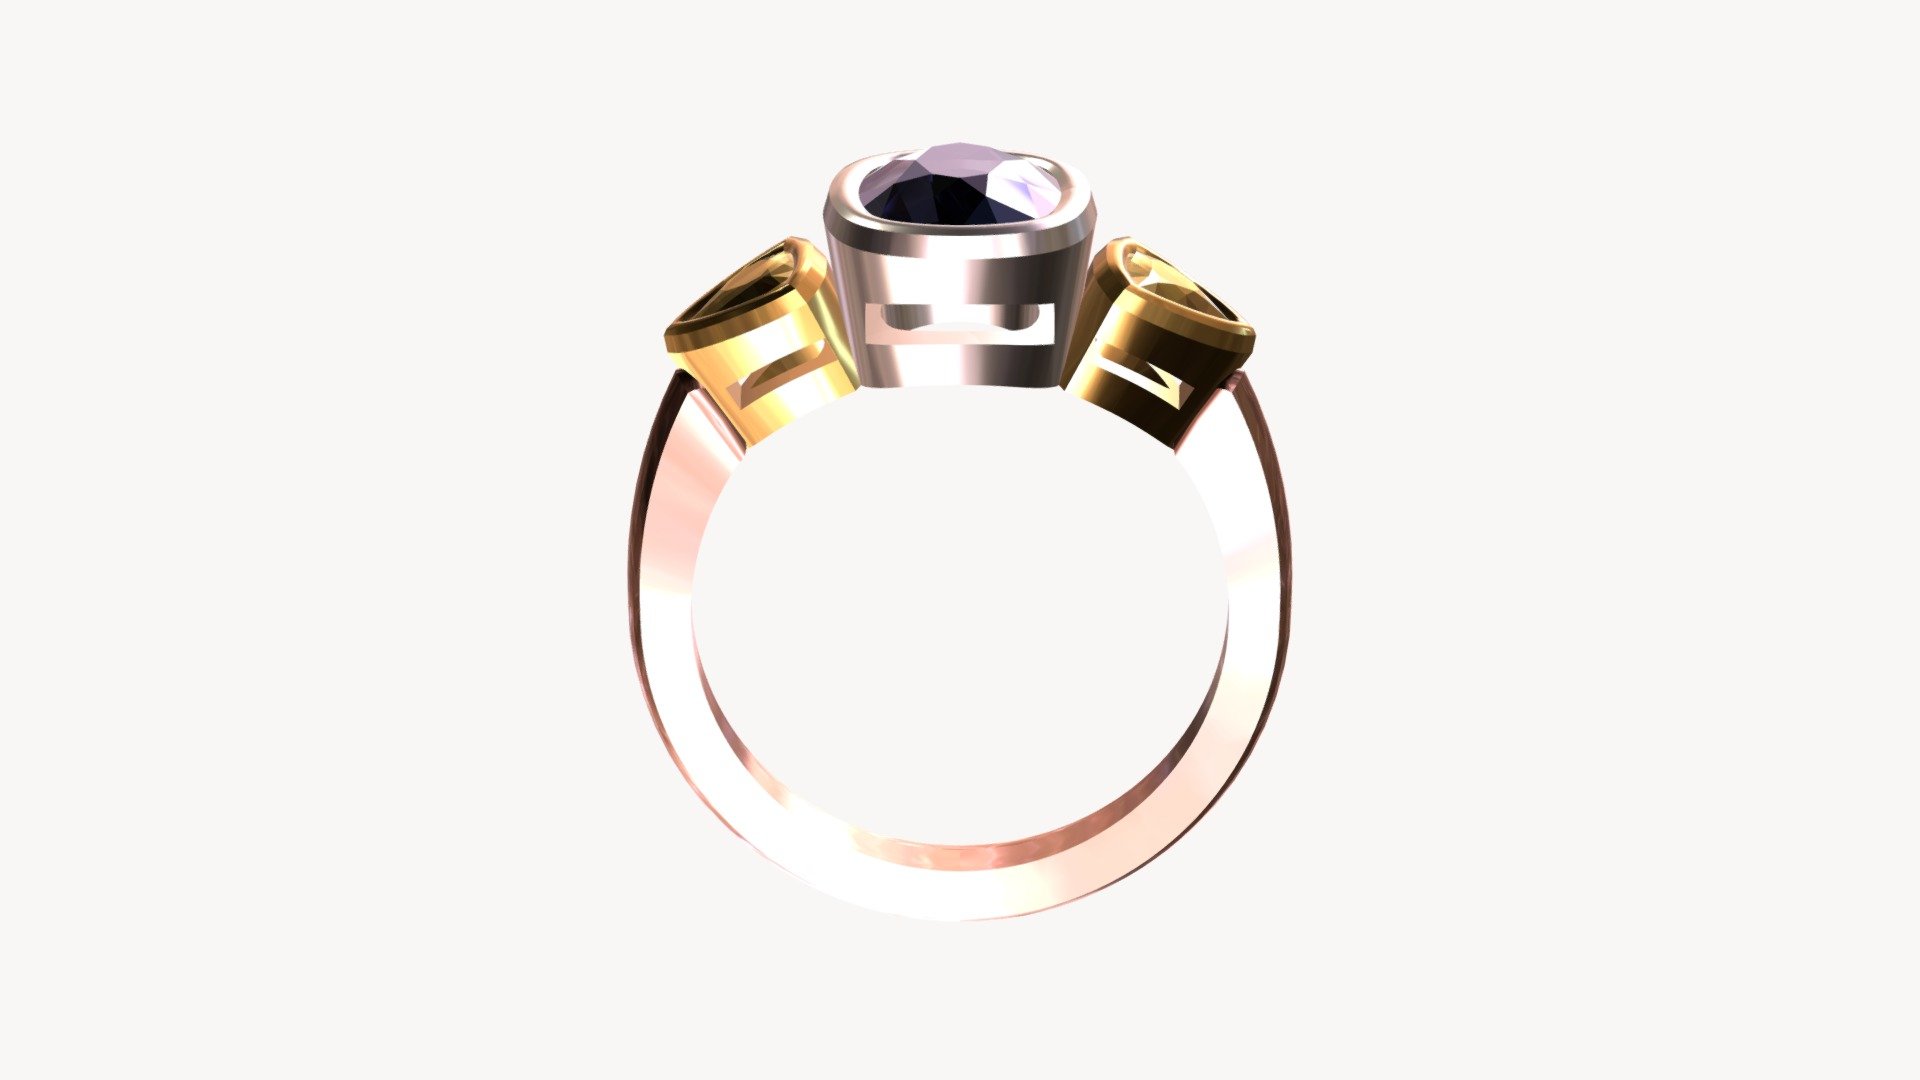 Sapphire and Diamond ring by Chris Smpson 3d model